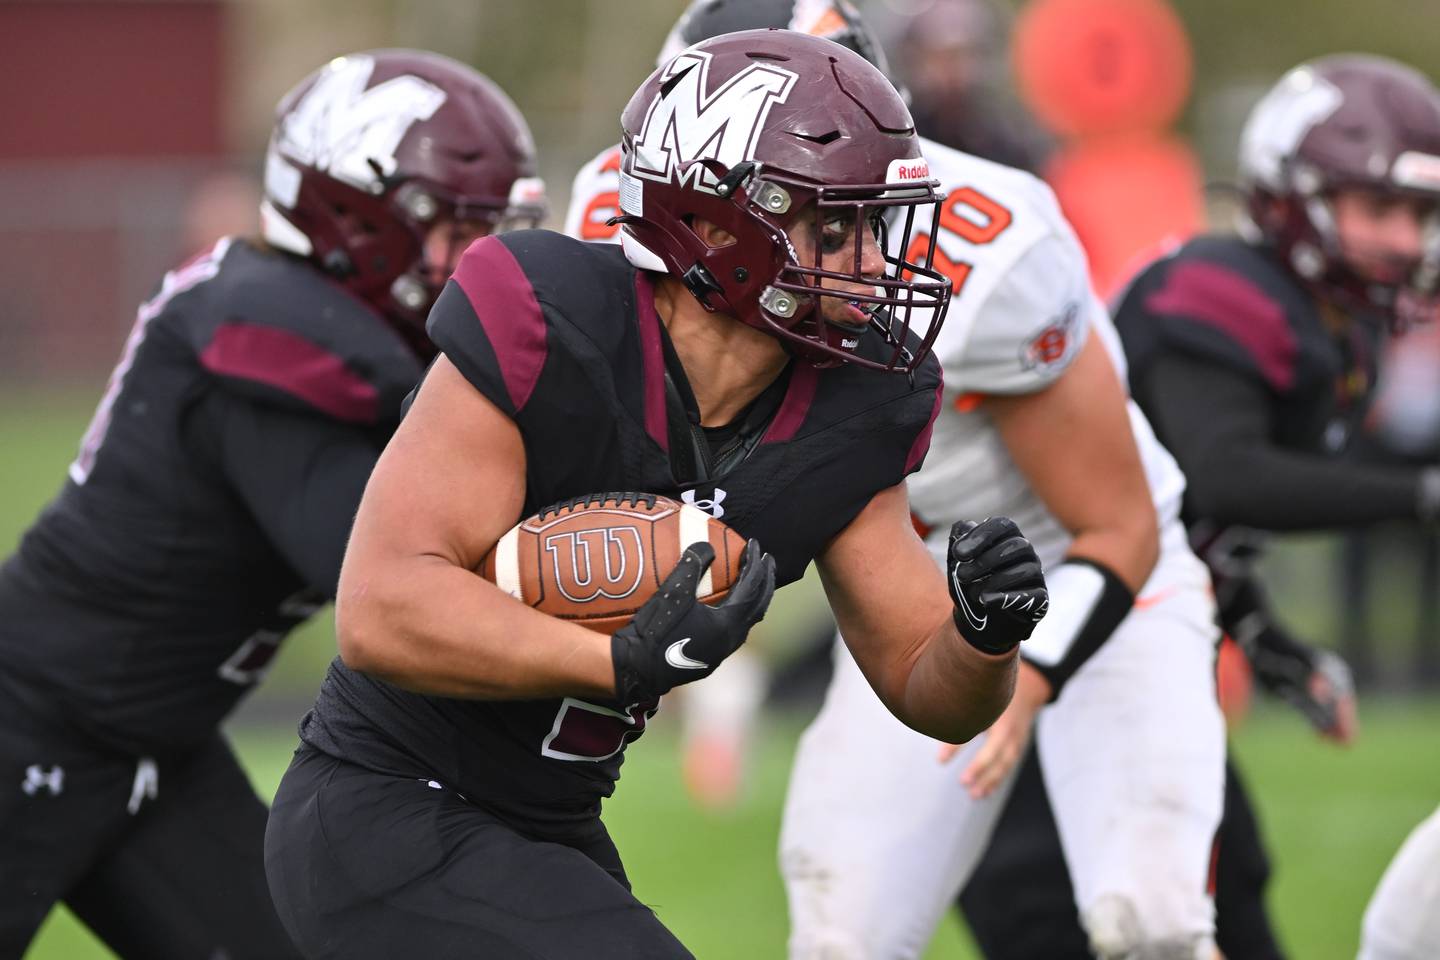 Marengo's Isaac Anthony runs for yardage against Kishwaukee River Conference rival Sandwich on Saturday, Oct. 14, 2023 in Marengo.